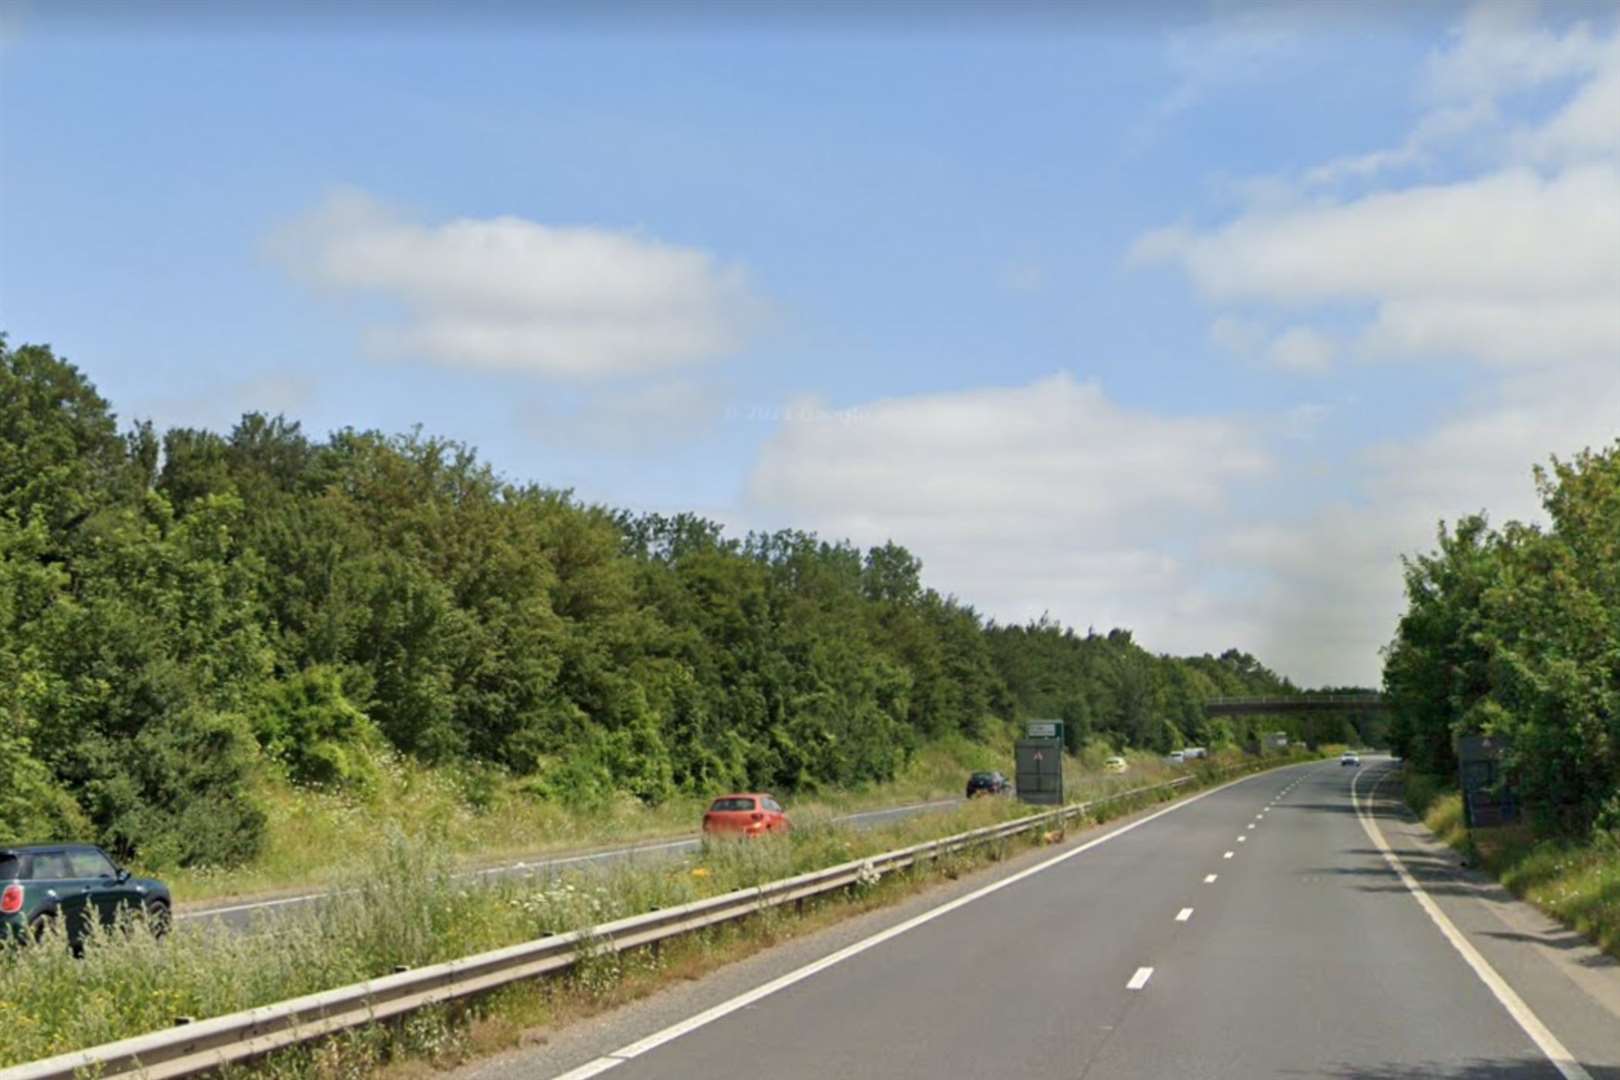 The incident happened on the A2 between Coldred and Lydden. Picture: Google Maps (58973328)